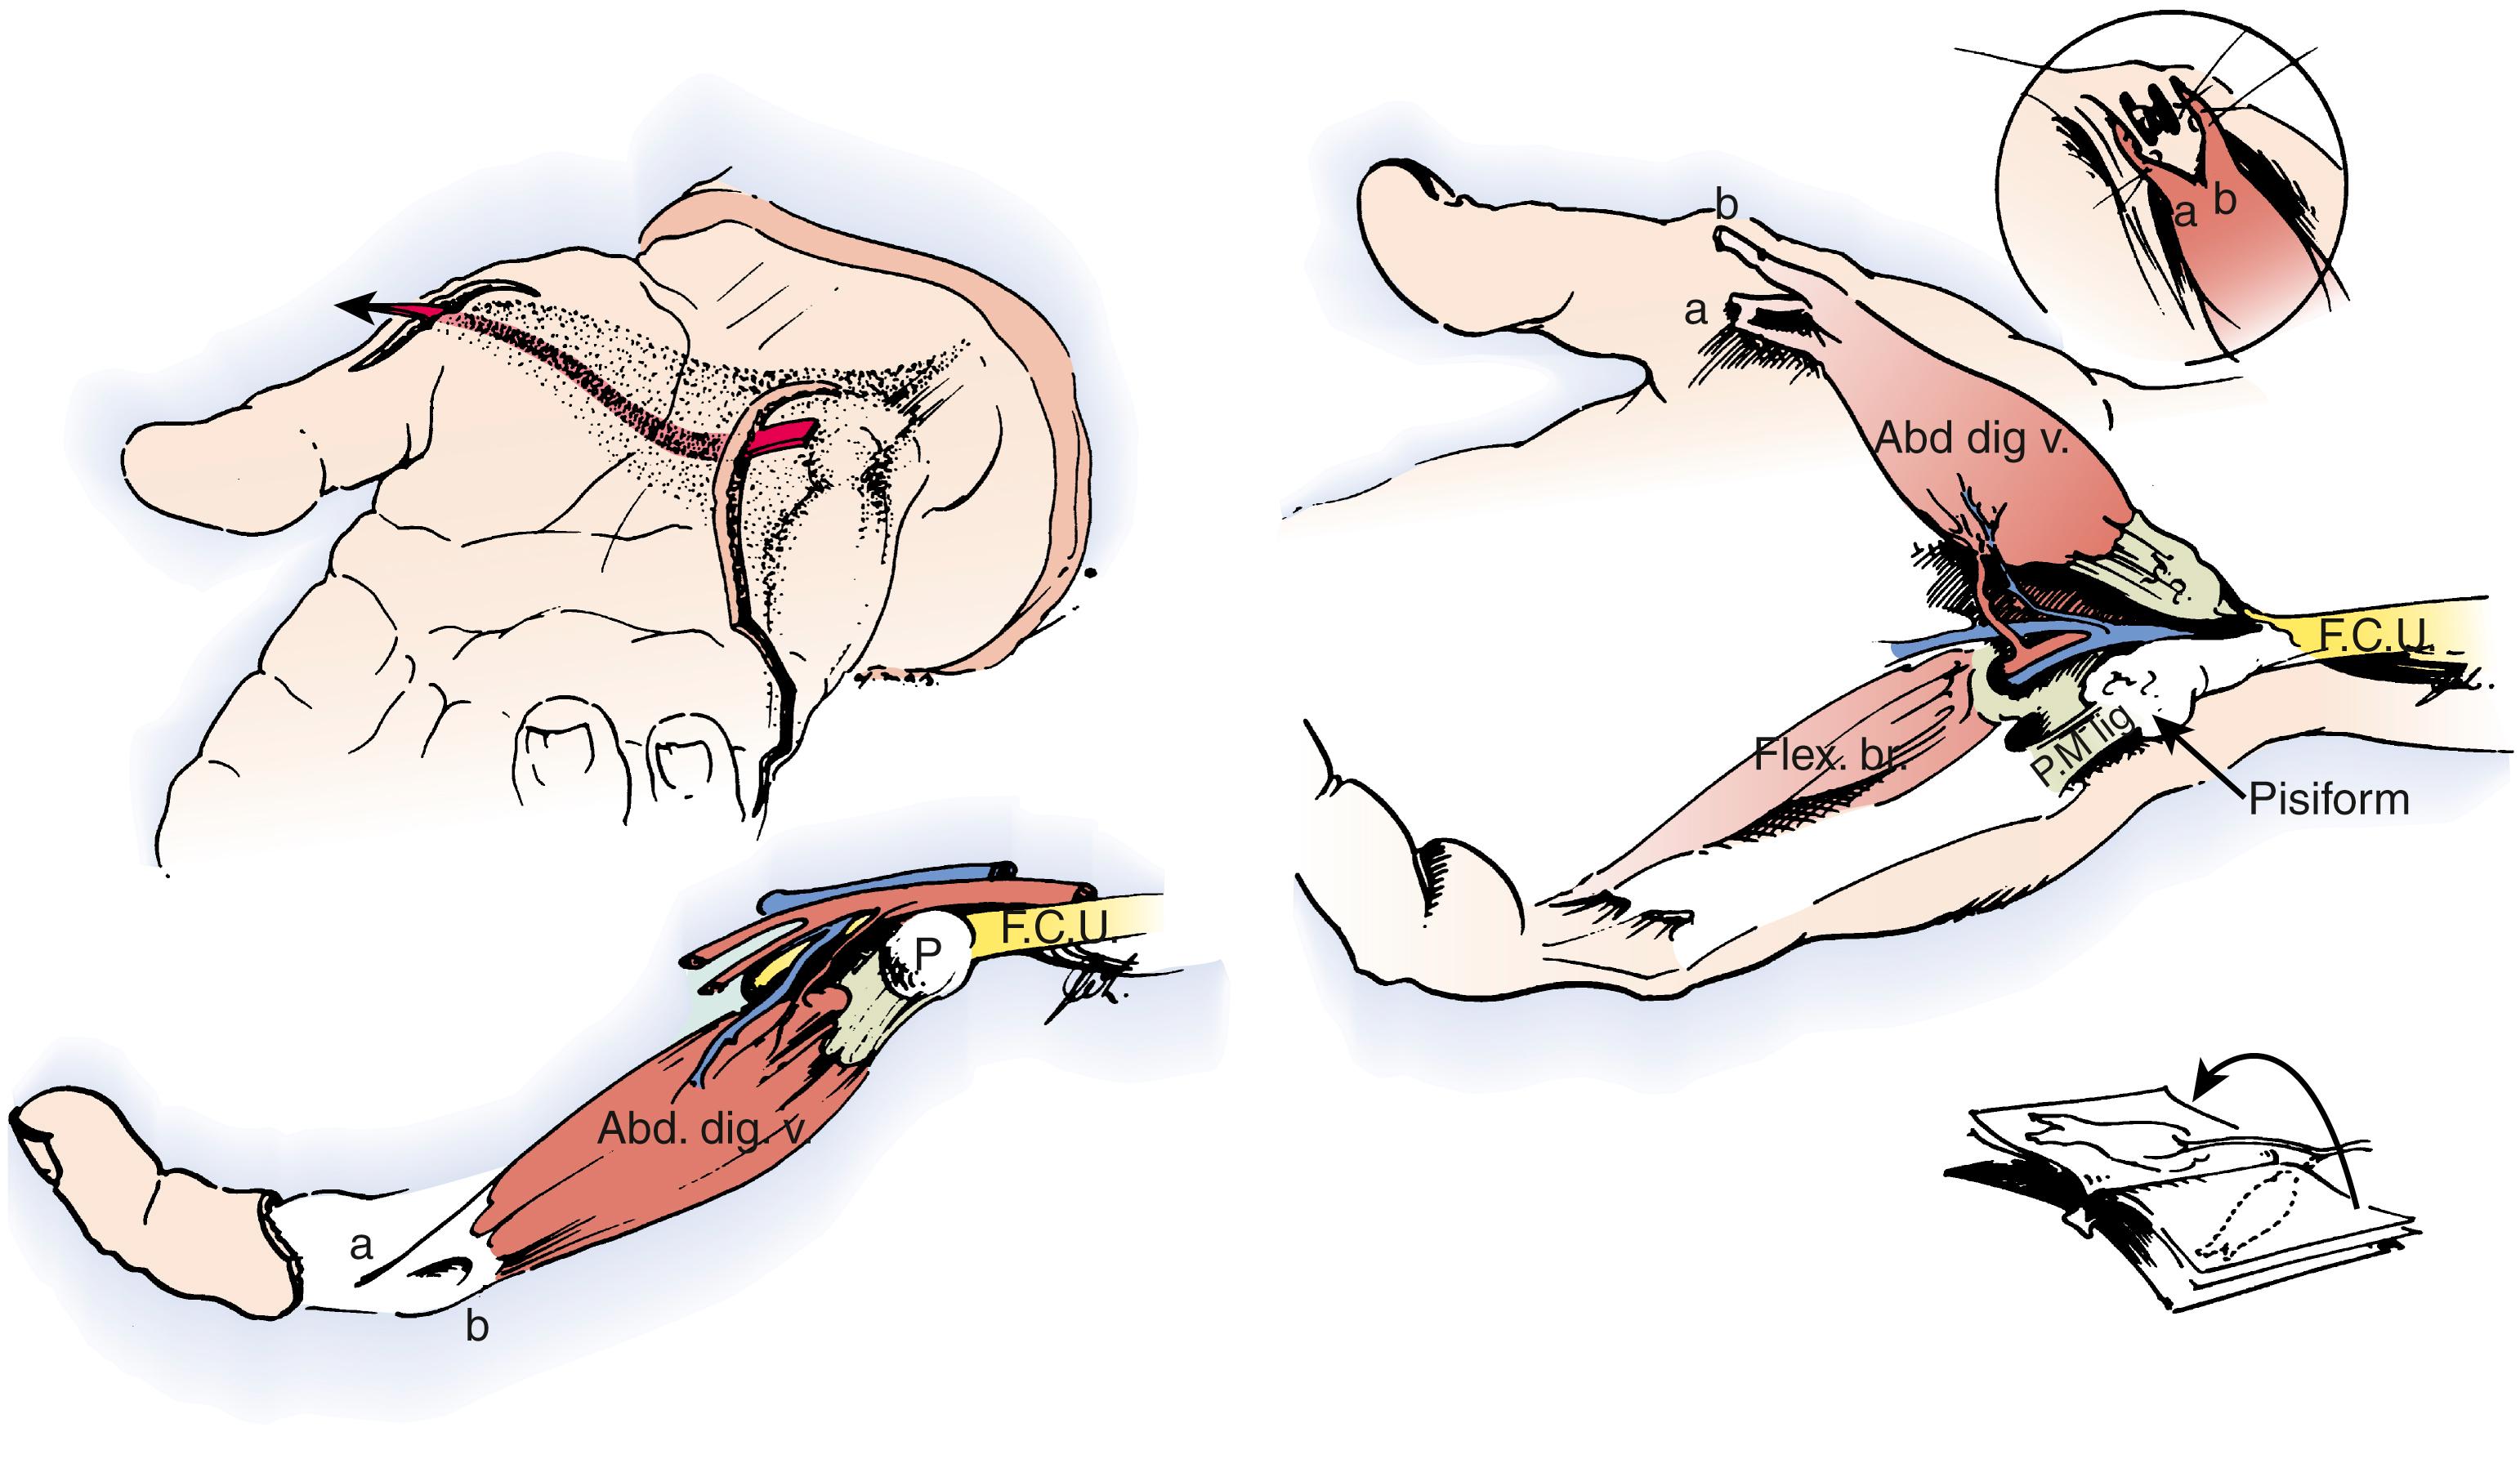 Fig. 31.4, Huber abductor digiti minimi (ADM) opponensplasty. Two incisions are required to expose and transfer the ADM (Abd. dig. v.) . The neurovascular structures enter the muscle proximally on its deep and radial aspect. The muscle is freed from the other hypothenar muscles, and its origin on the pisiform (P) is elevated while preserving a tendinous attachment to the tendon of the flexor carpi ulnaris (F.C.U.) . The ADM is then rotated 180 degrees on its long axis and passed subcutaneously to the area of the thumb MCP joint. The distal attachment is to the APB muscle. Flex. br., Flexor digiti minimi brevis; P.M. lig., pisometacarpal ligament.